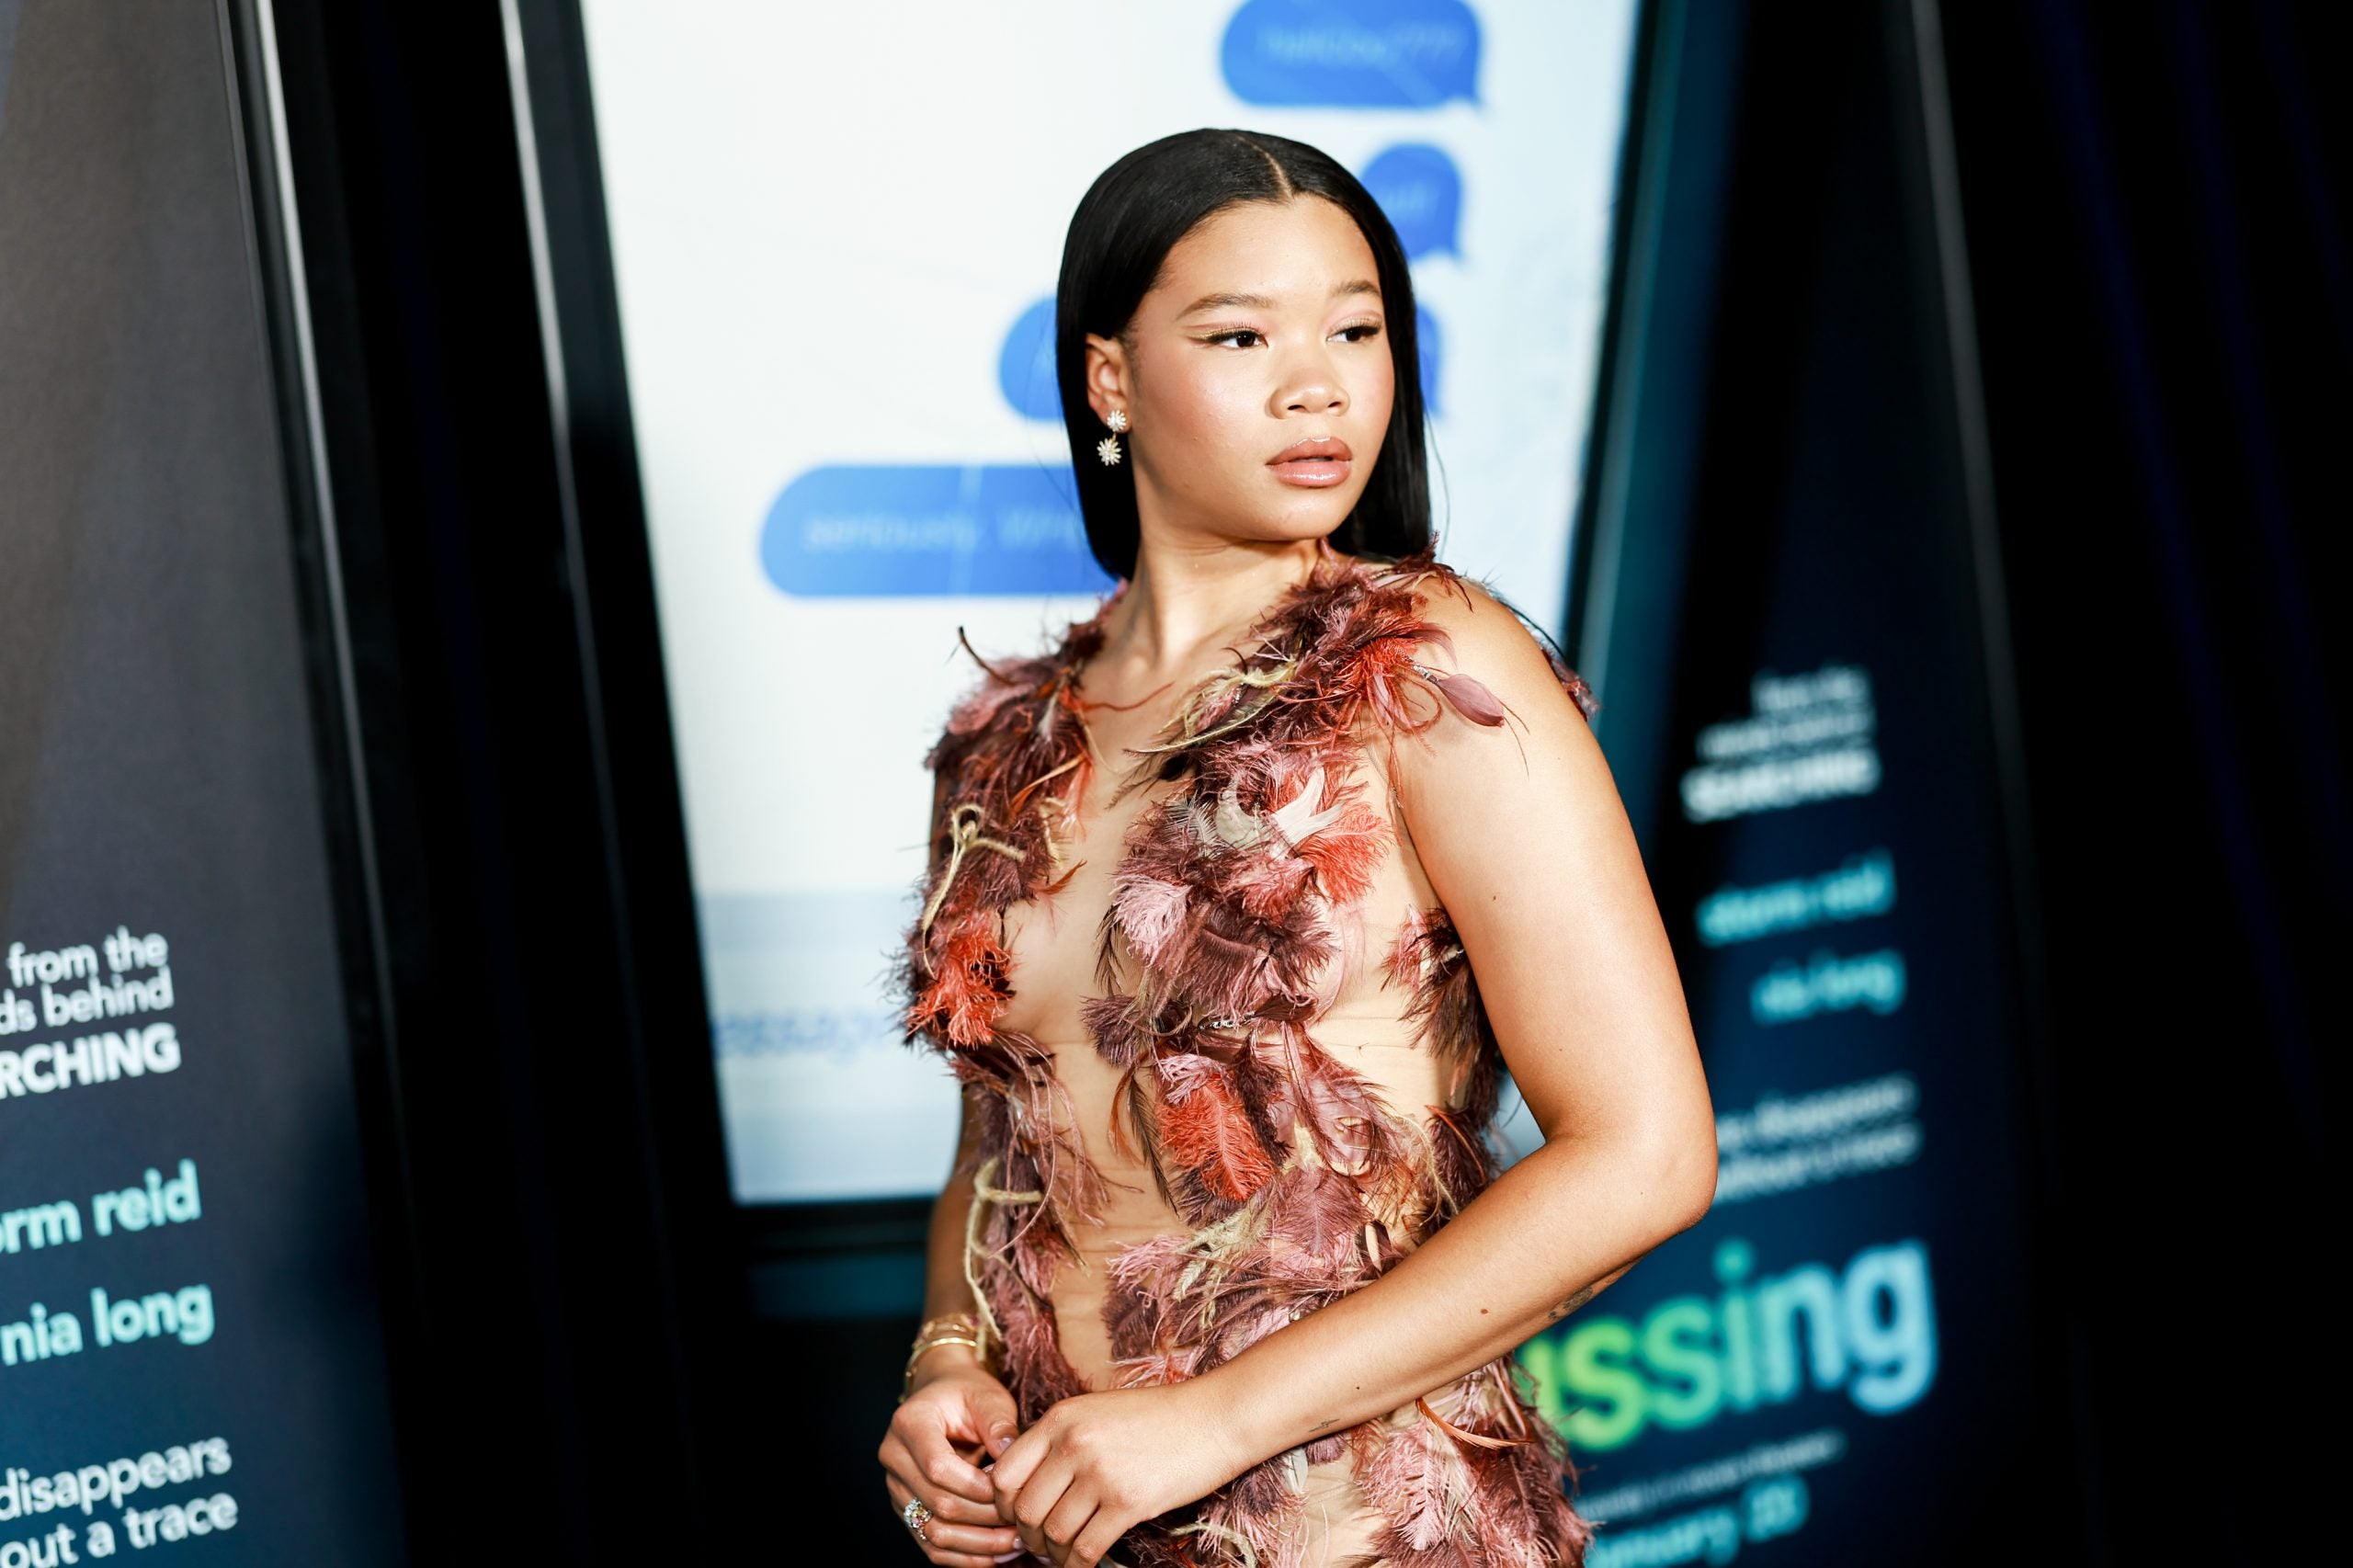 WATCH: Storm Reid Talks Acting Against Computer Screens For Her New Thriller, “Missing”